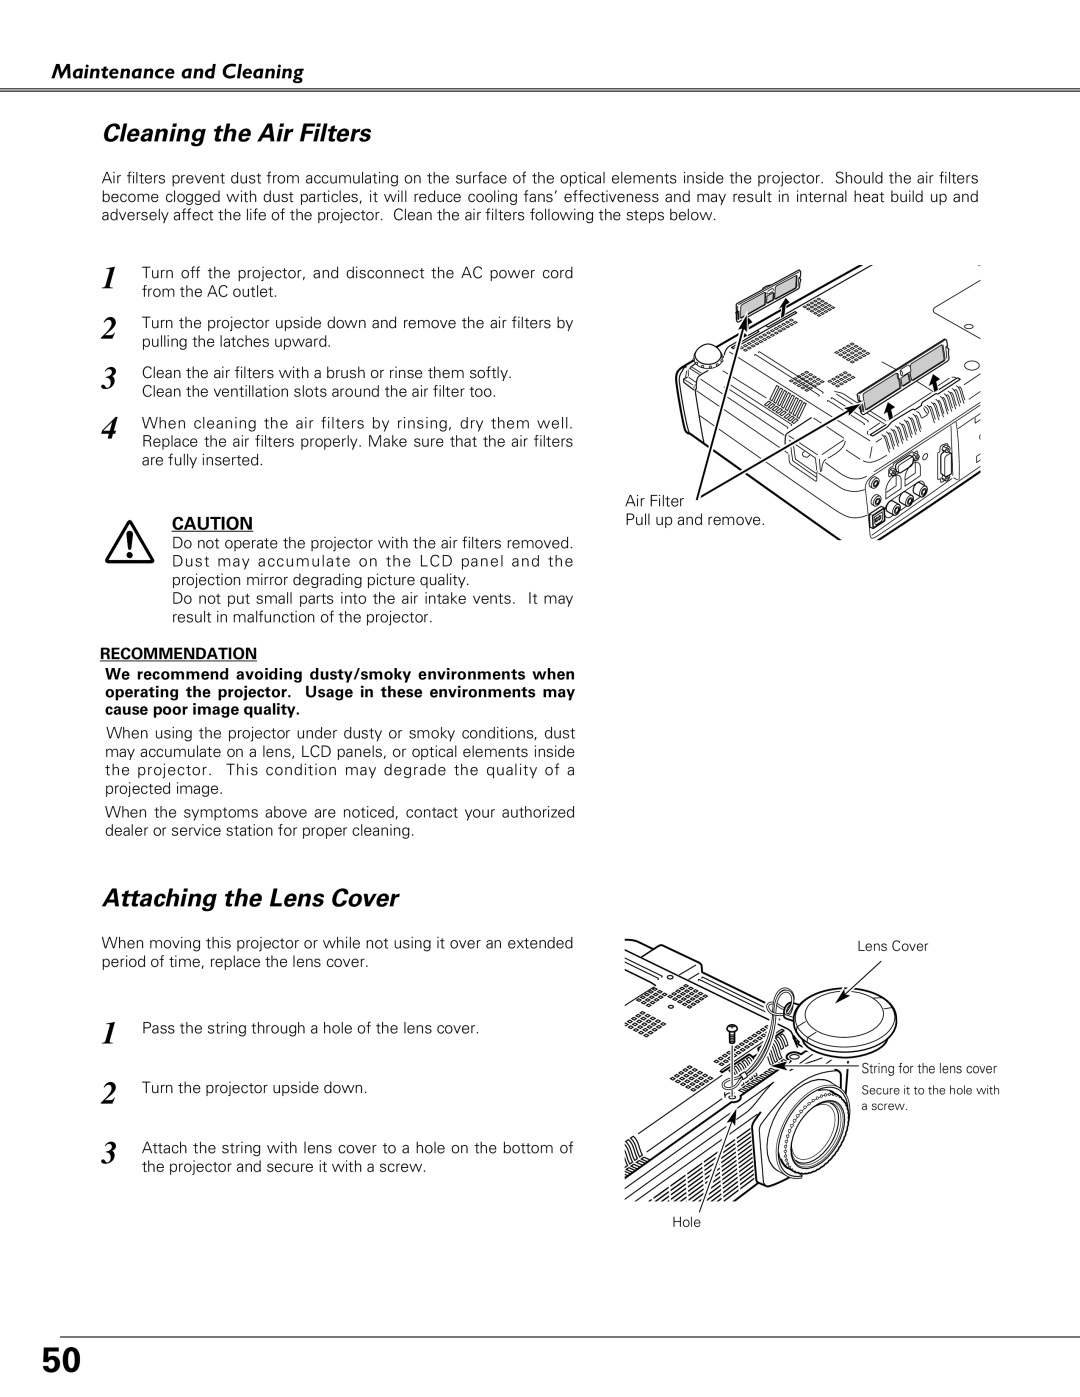 Eiki LC-SB21 owner manual Cleaning the Air Filters, Attaching the Lens Cover, Maintenance and Cleaning, Recommendation 